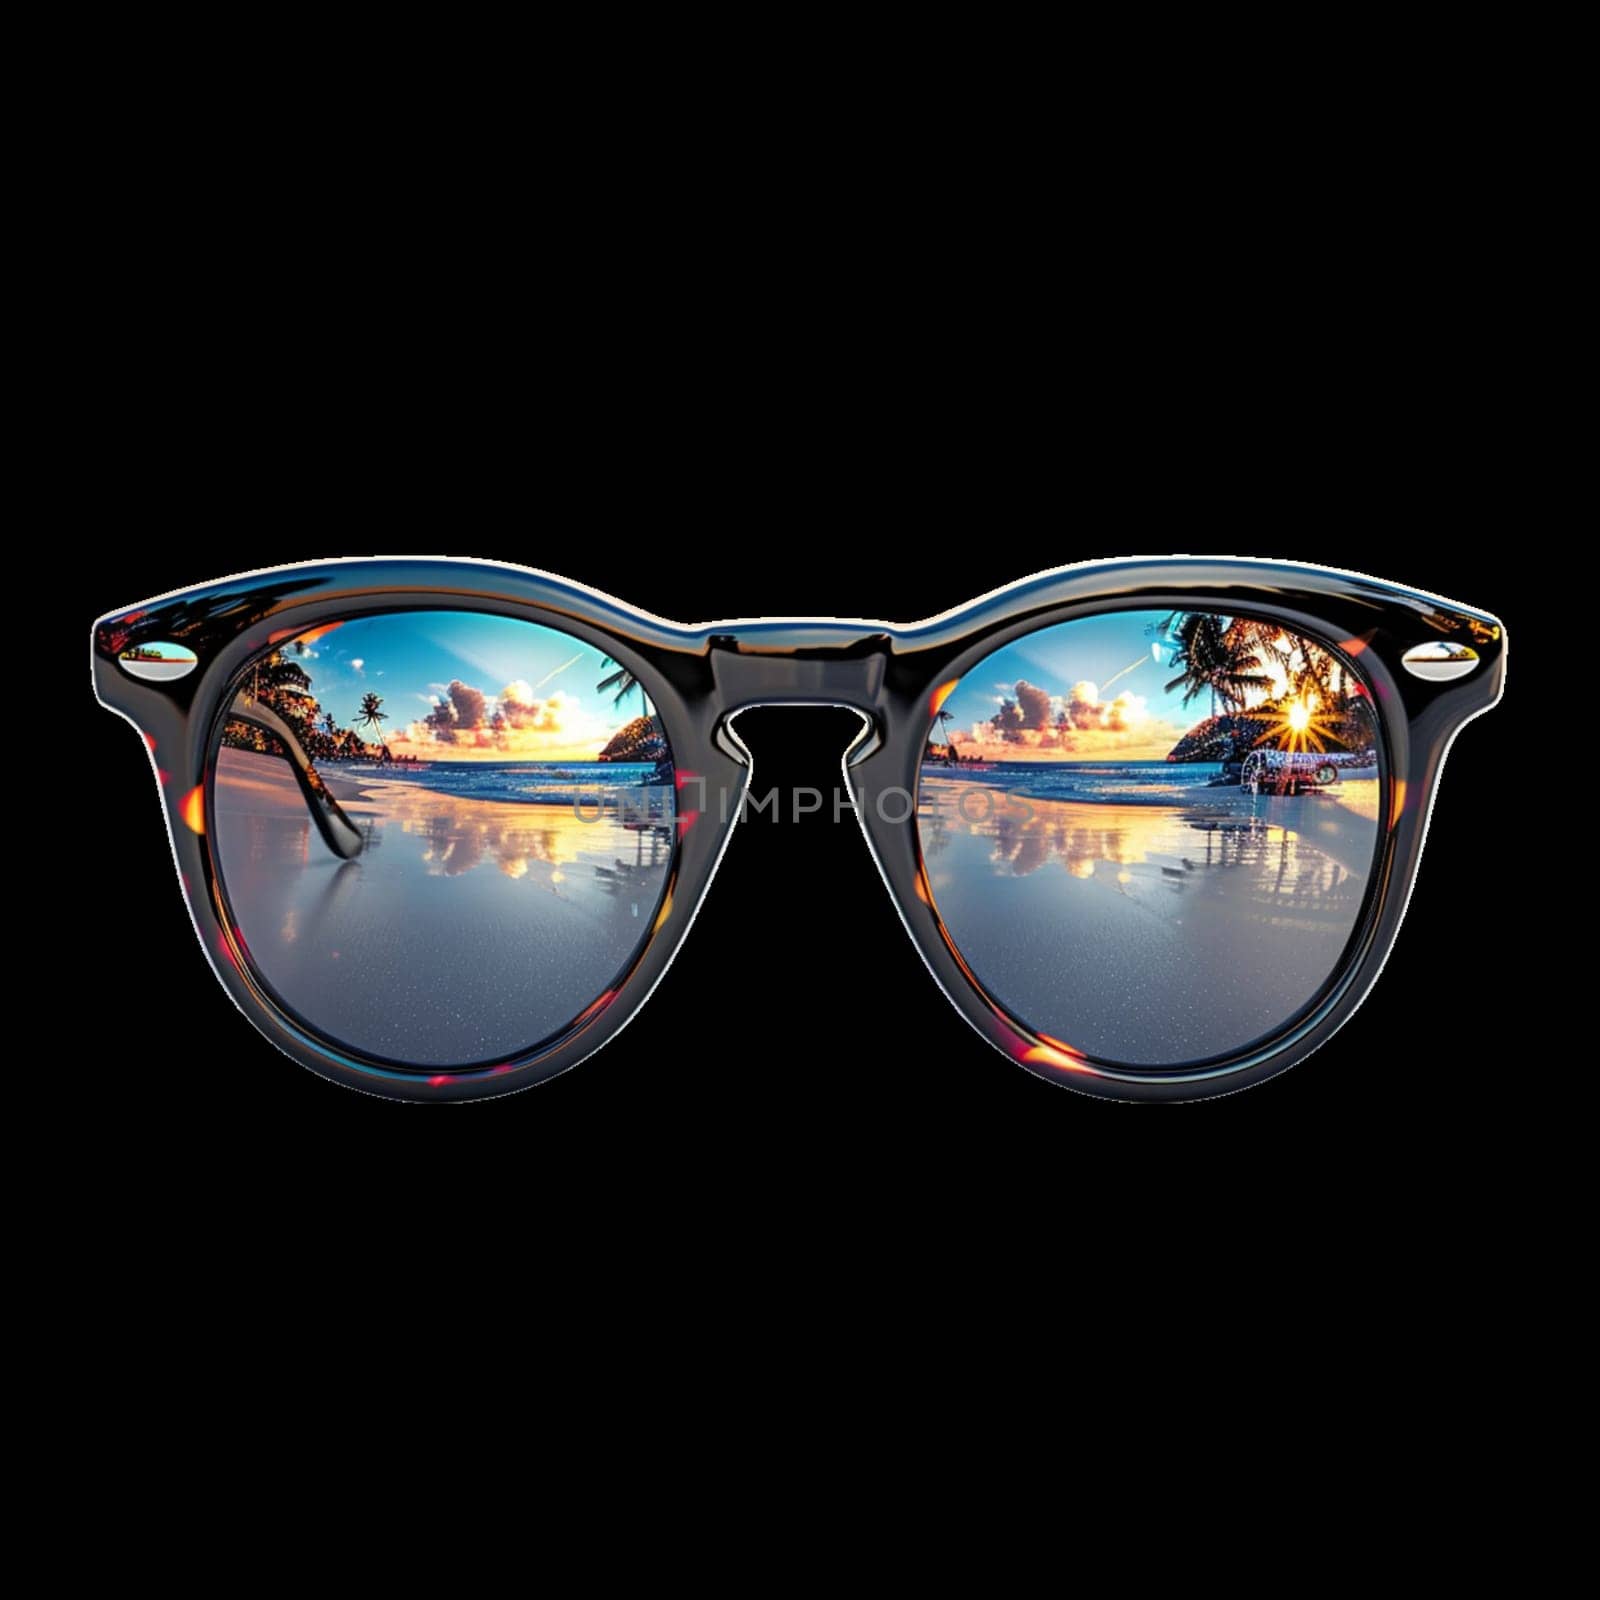 Sunglasses with Reflection of Tropical Paradise Beach on it, Png Mockup Isolated on Transparent Background by iliris